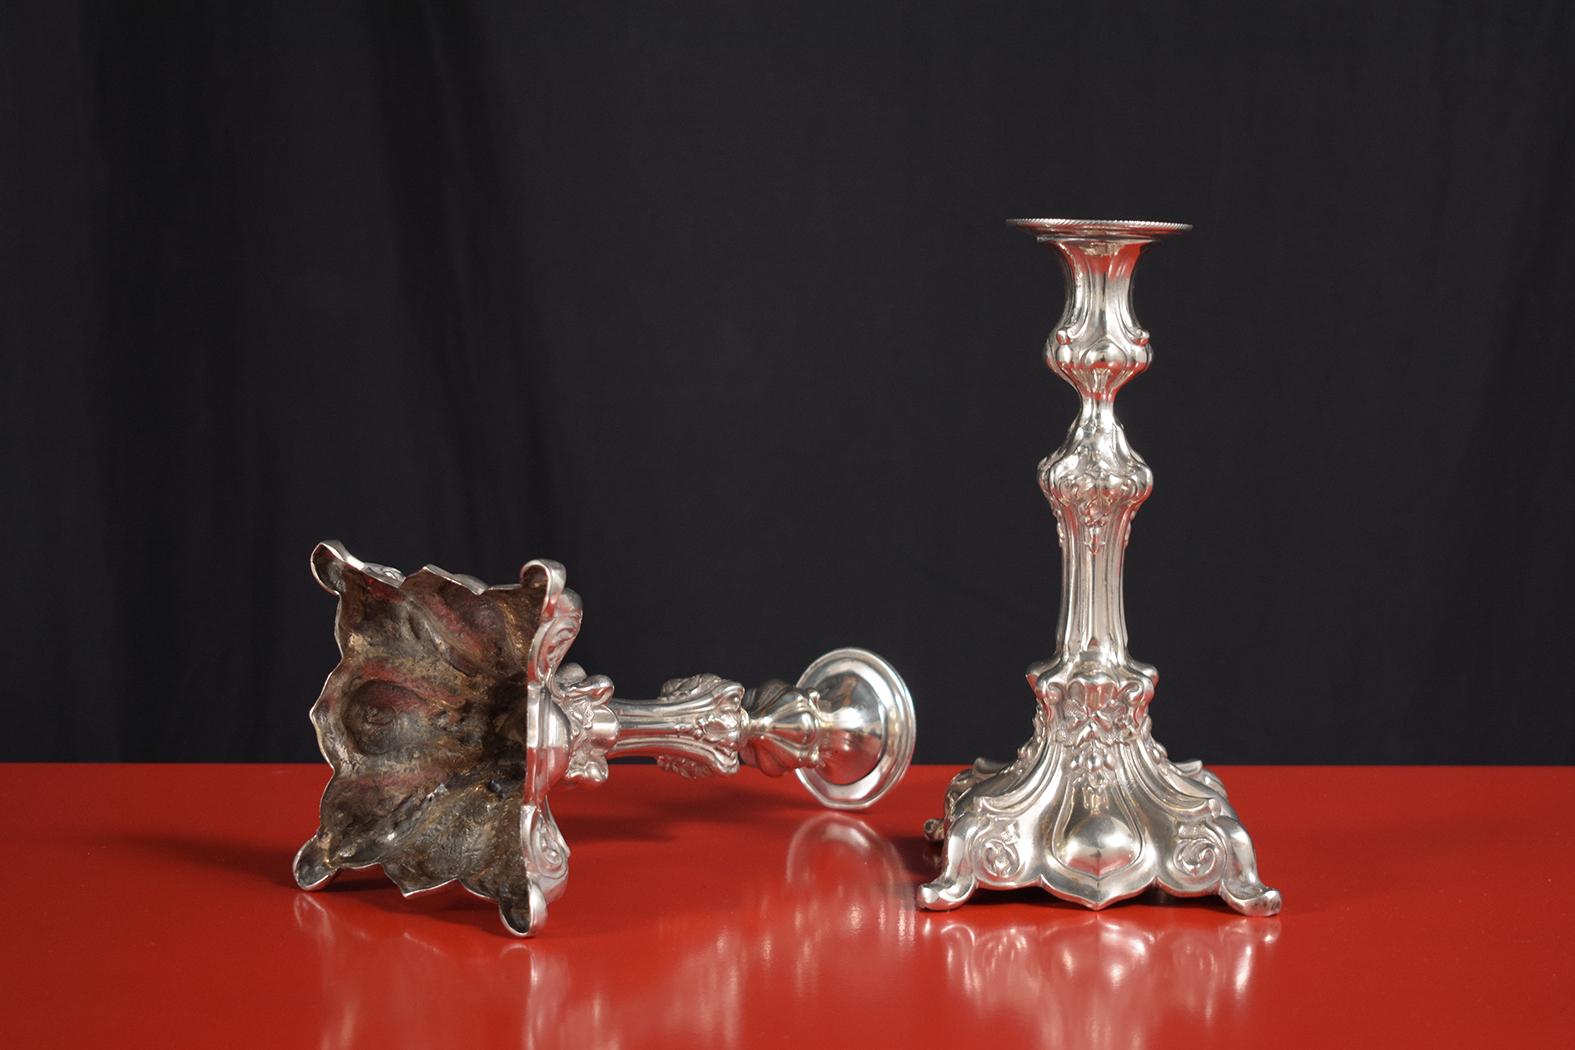 Introducing our set of two Vintage Sterling Silver Candle Holders, meticulously cleaned and polished by our expert in-house team. Resting on a six-pointed base, these candle stick holders captivate with their cambered stands and curved and pointed